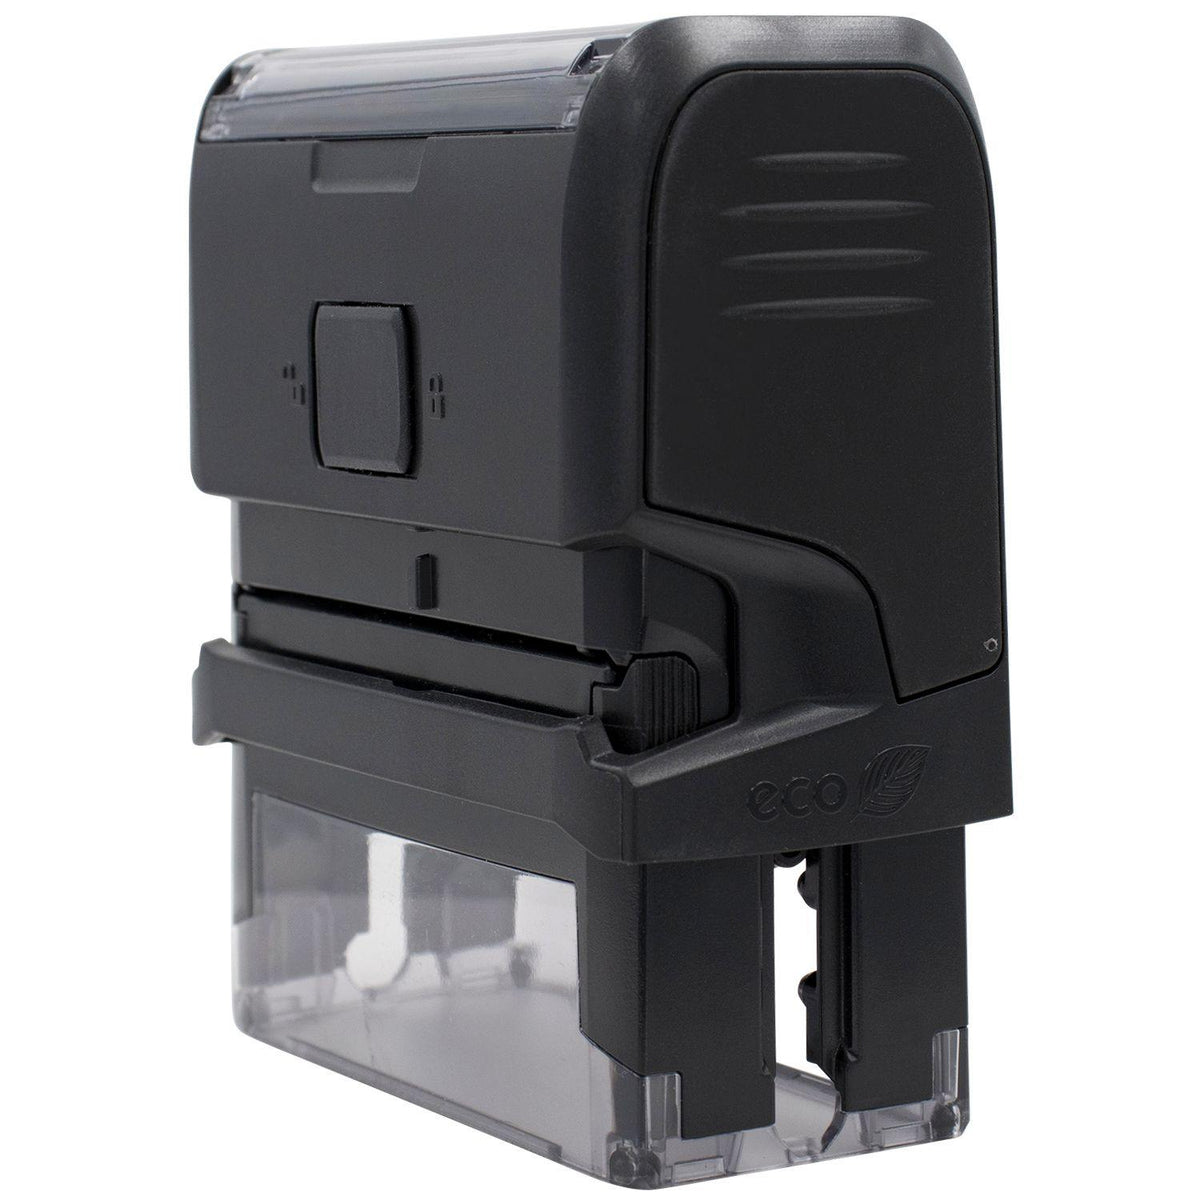 Self-Inking Great Improvement Stamp - Engineer Seal Stamps - Brand_Trodat, Impression Size_Small, Stamp Type_Self-Inking Stamp, Type of Use_Teacher